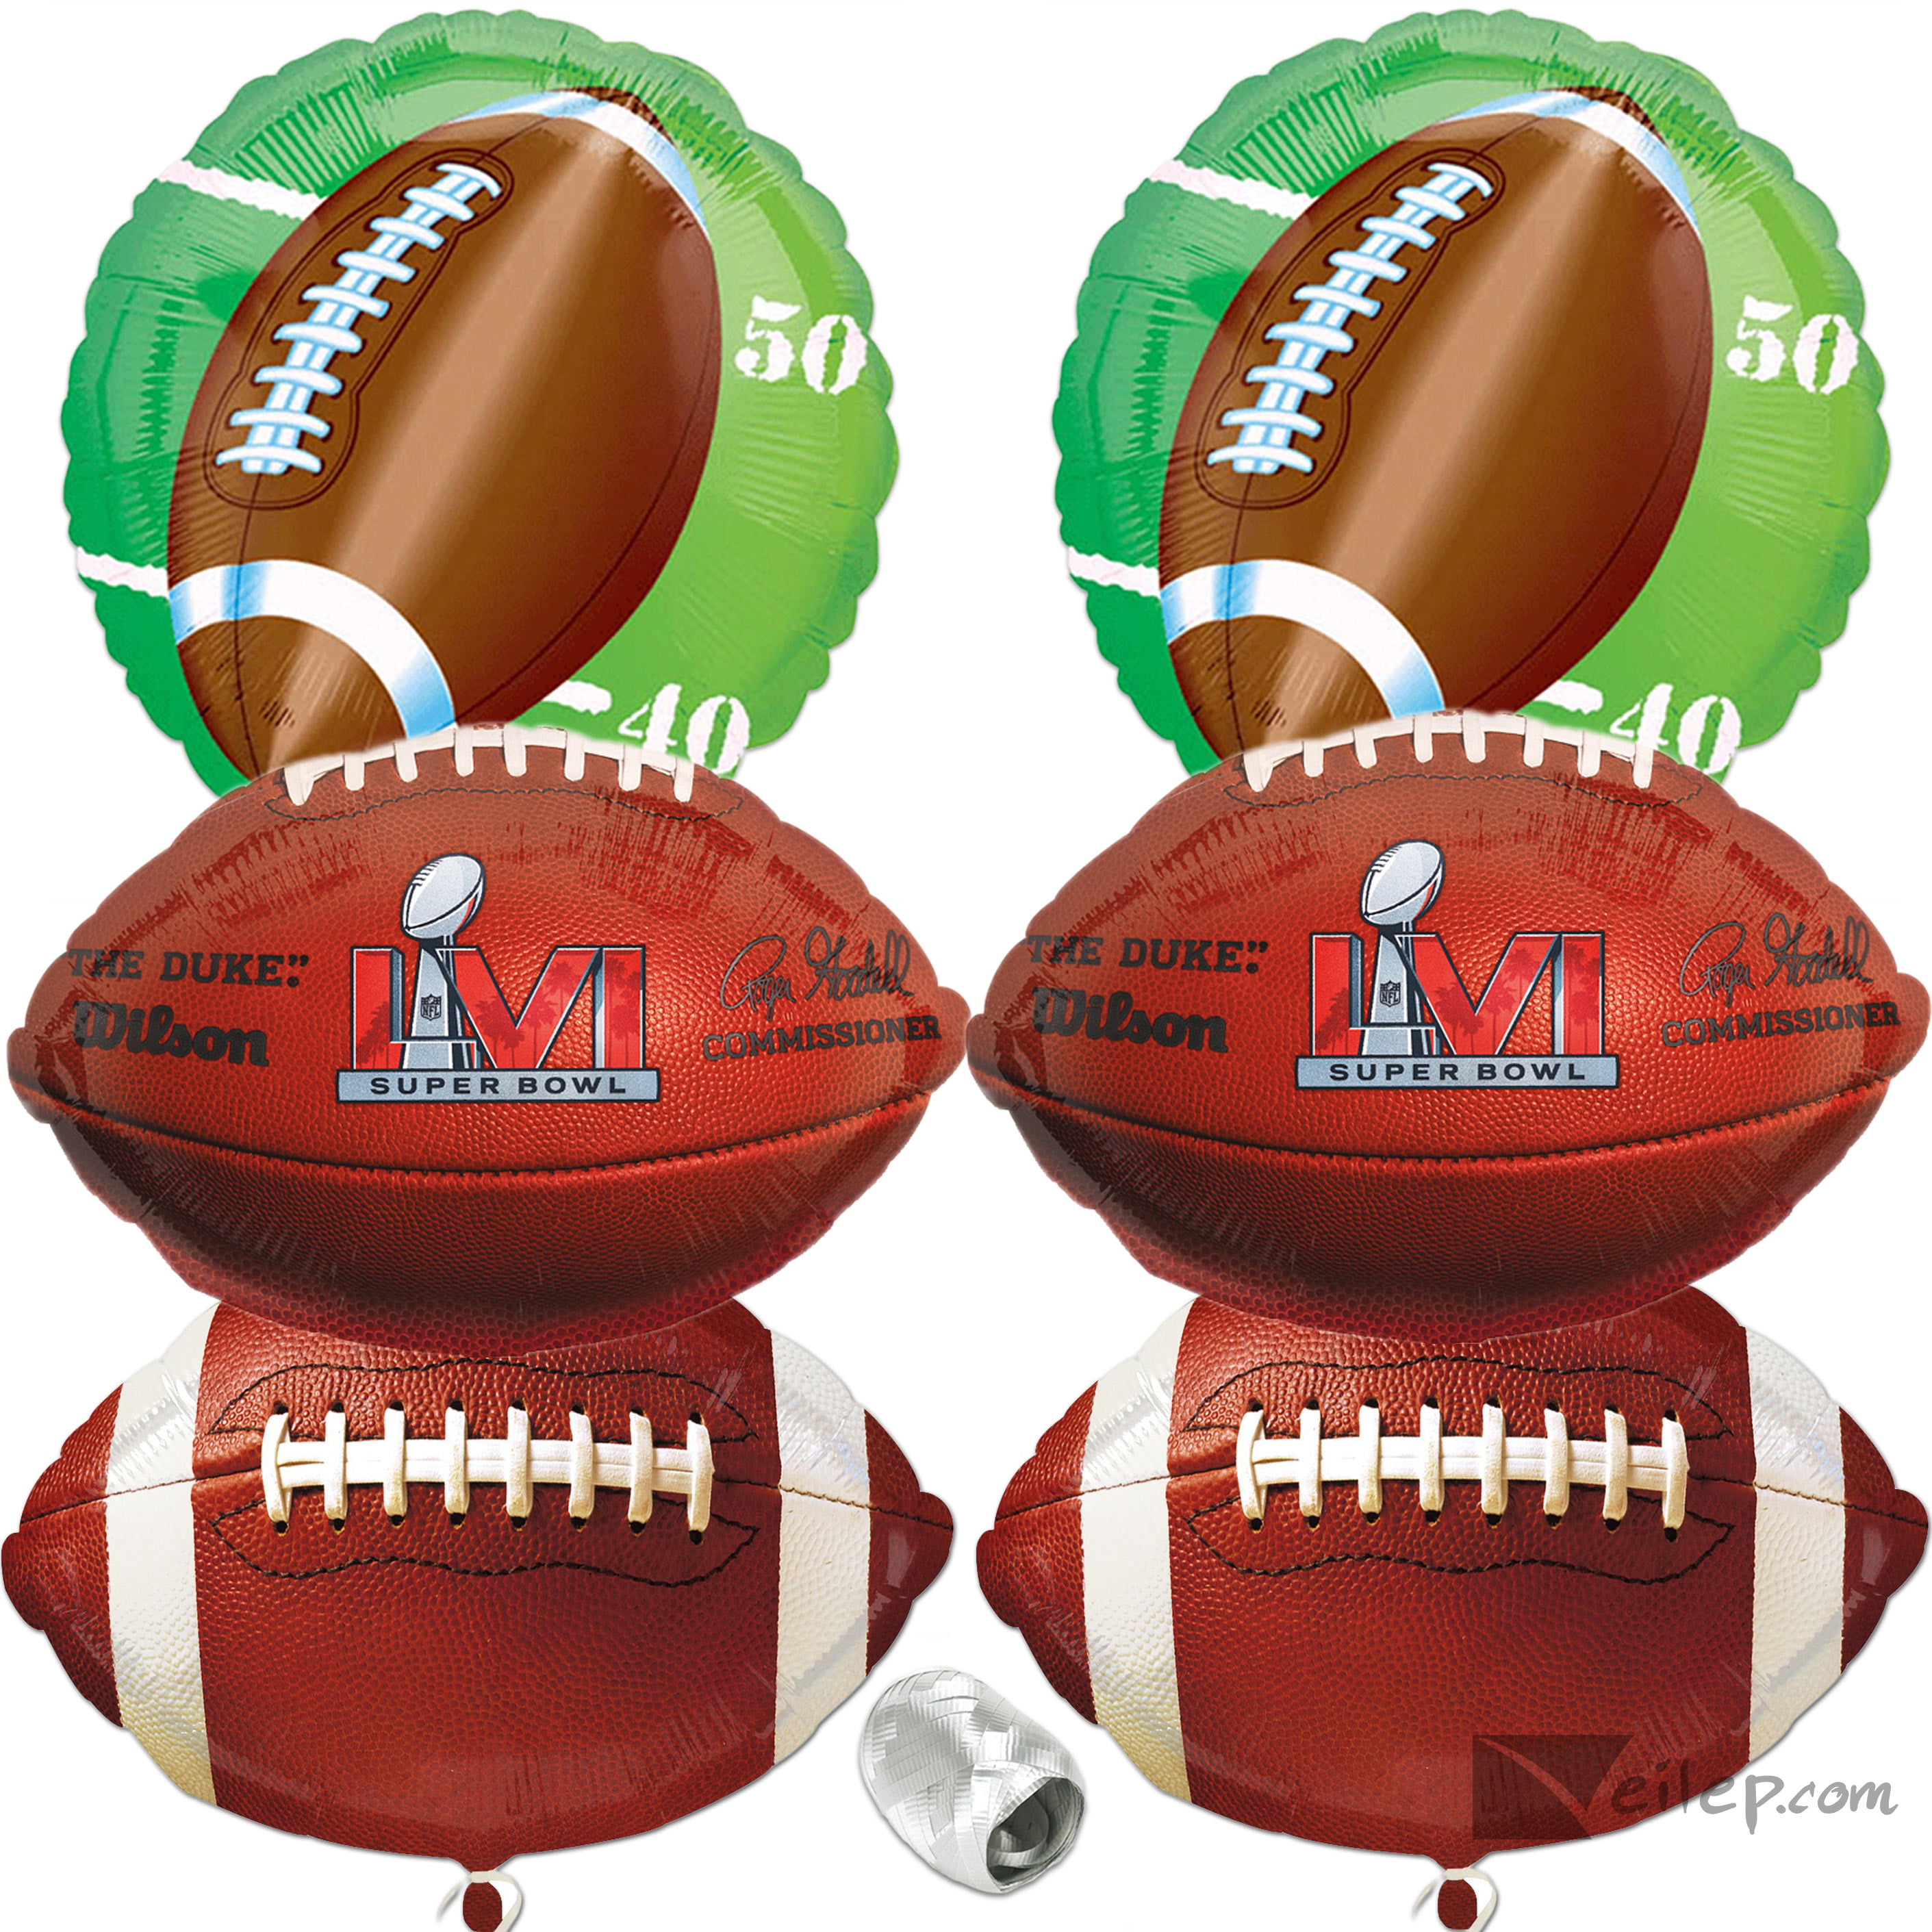 Touchdown Championship Football Sports Banquet Party Decoration Latex Balloons 